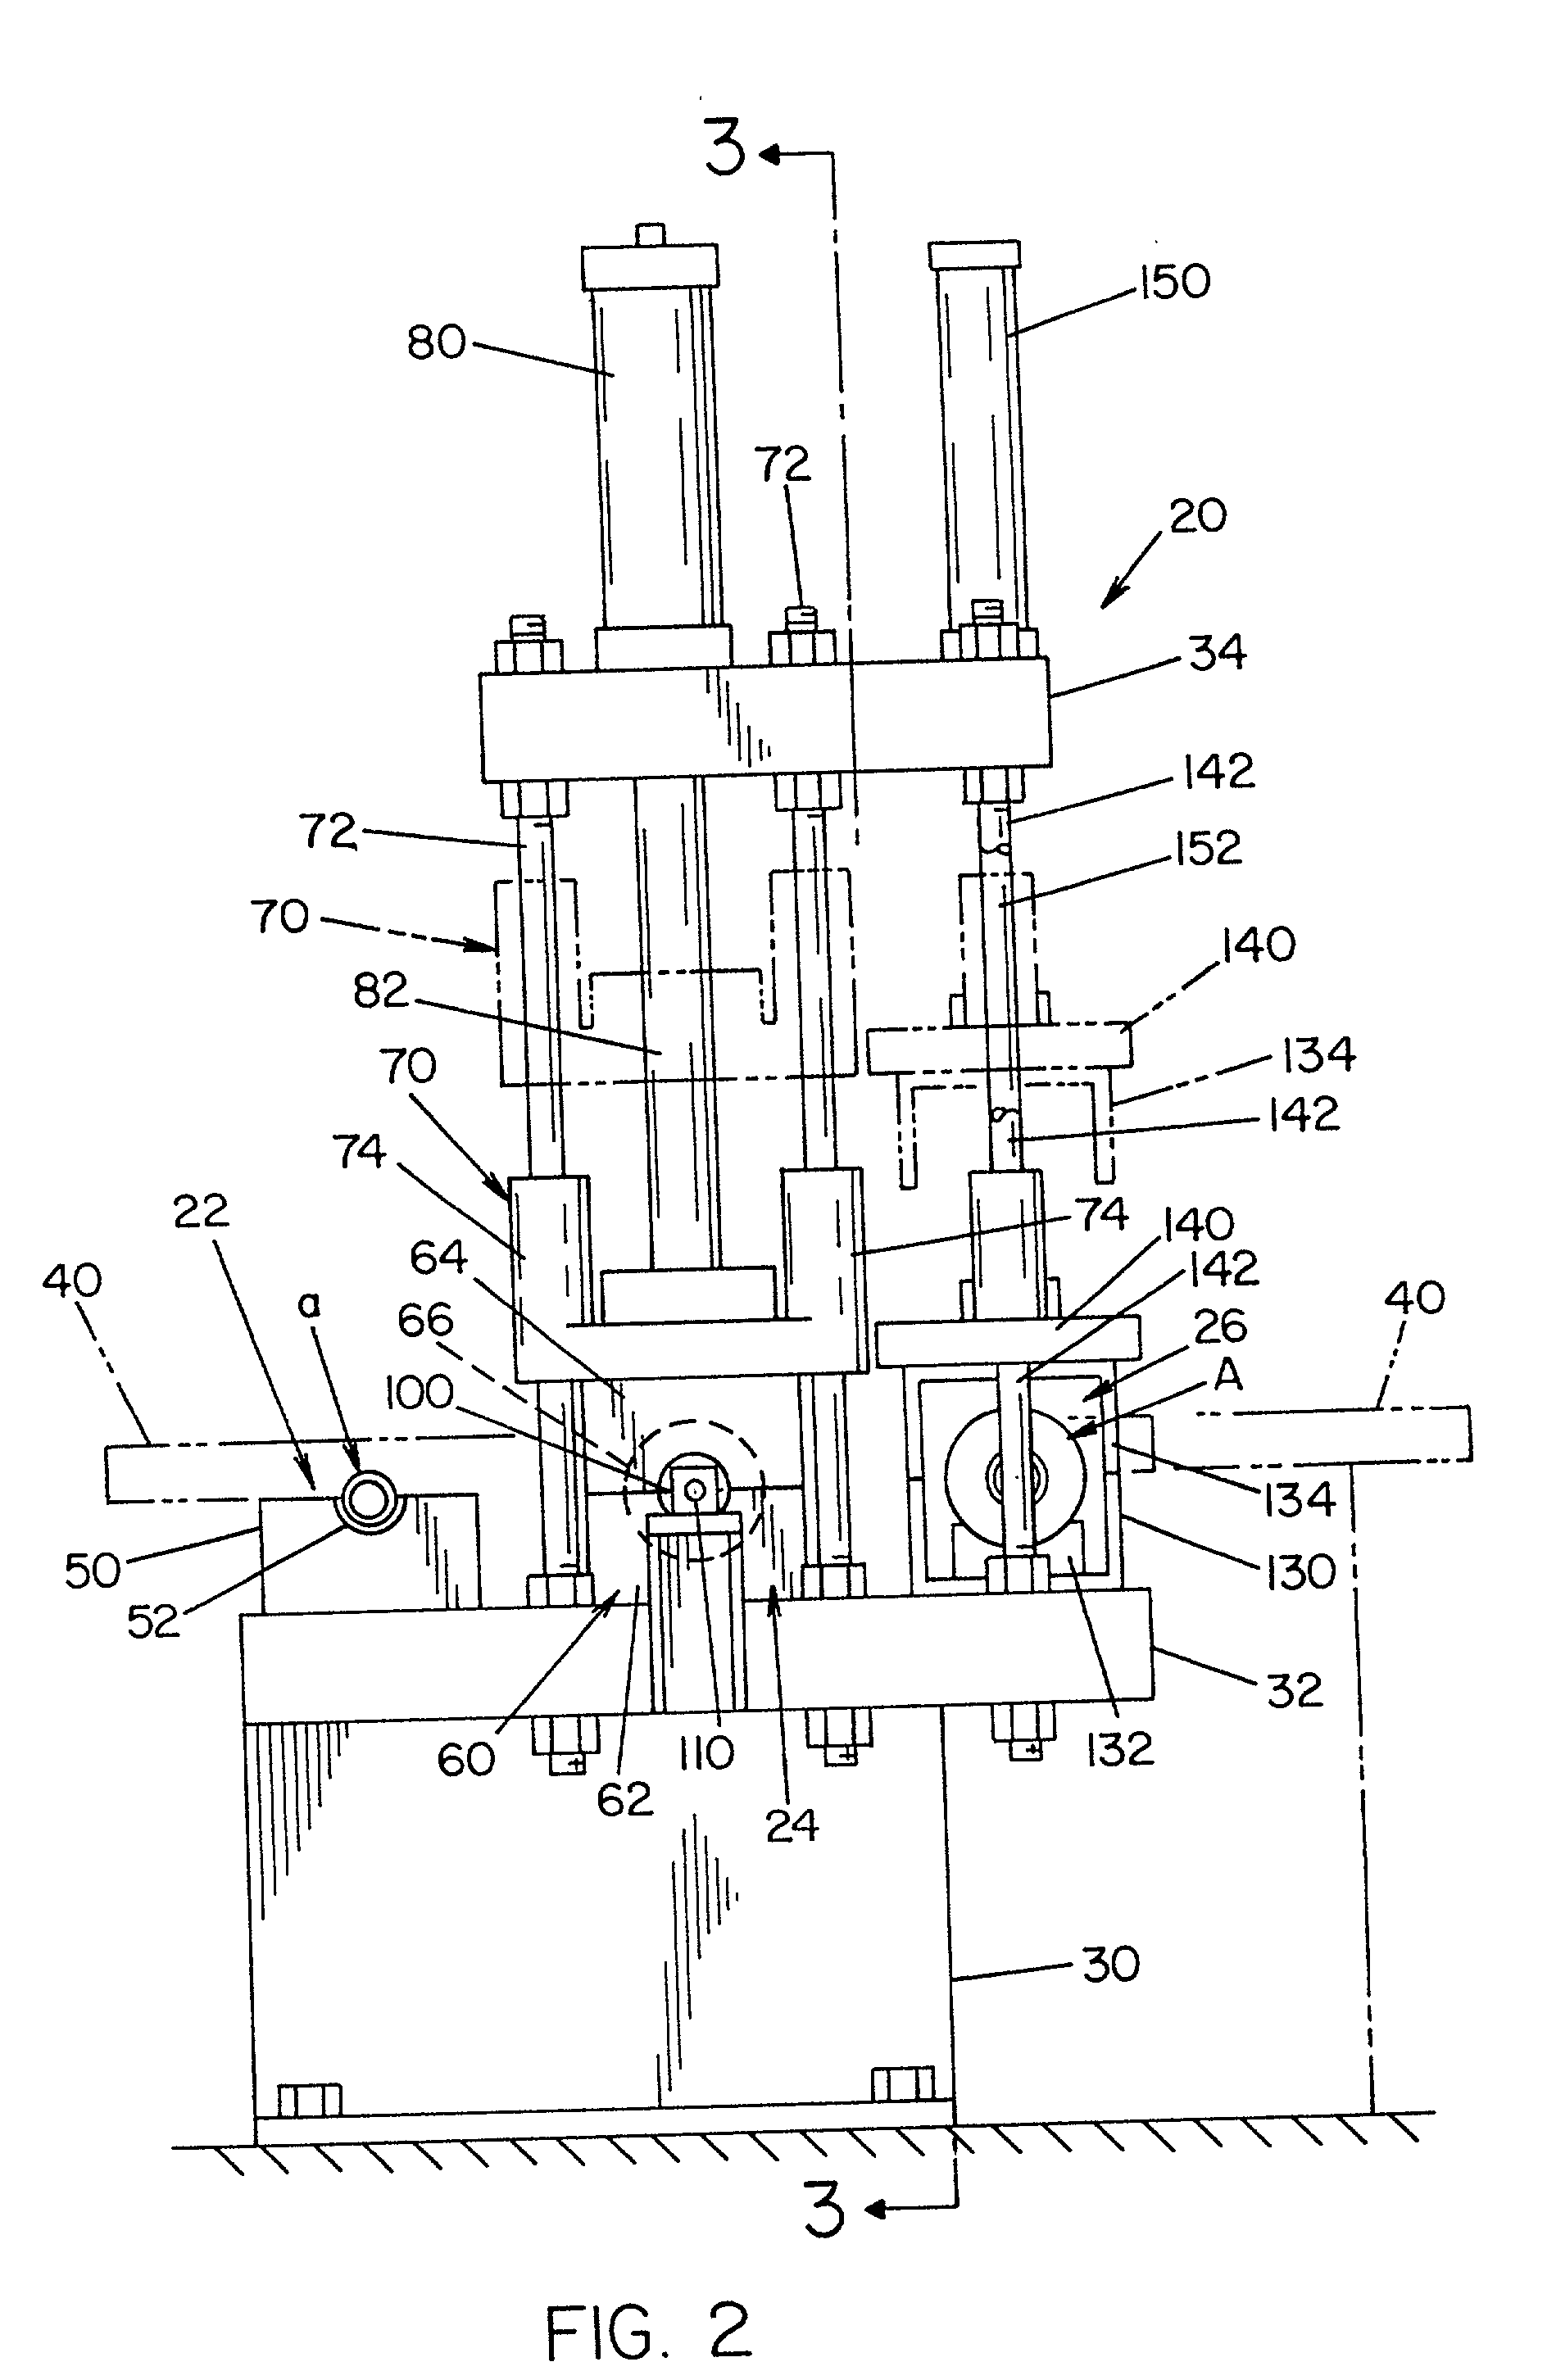 Method of forming a tubular blank into a structural component and die therefor